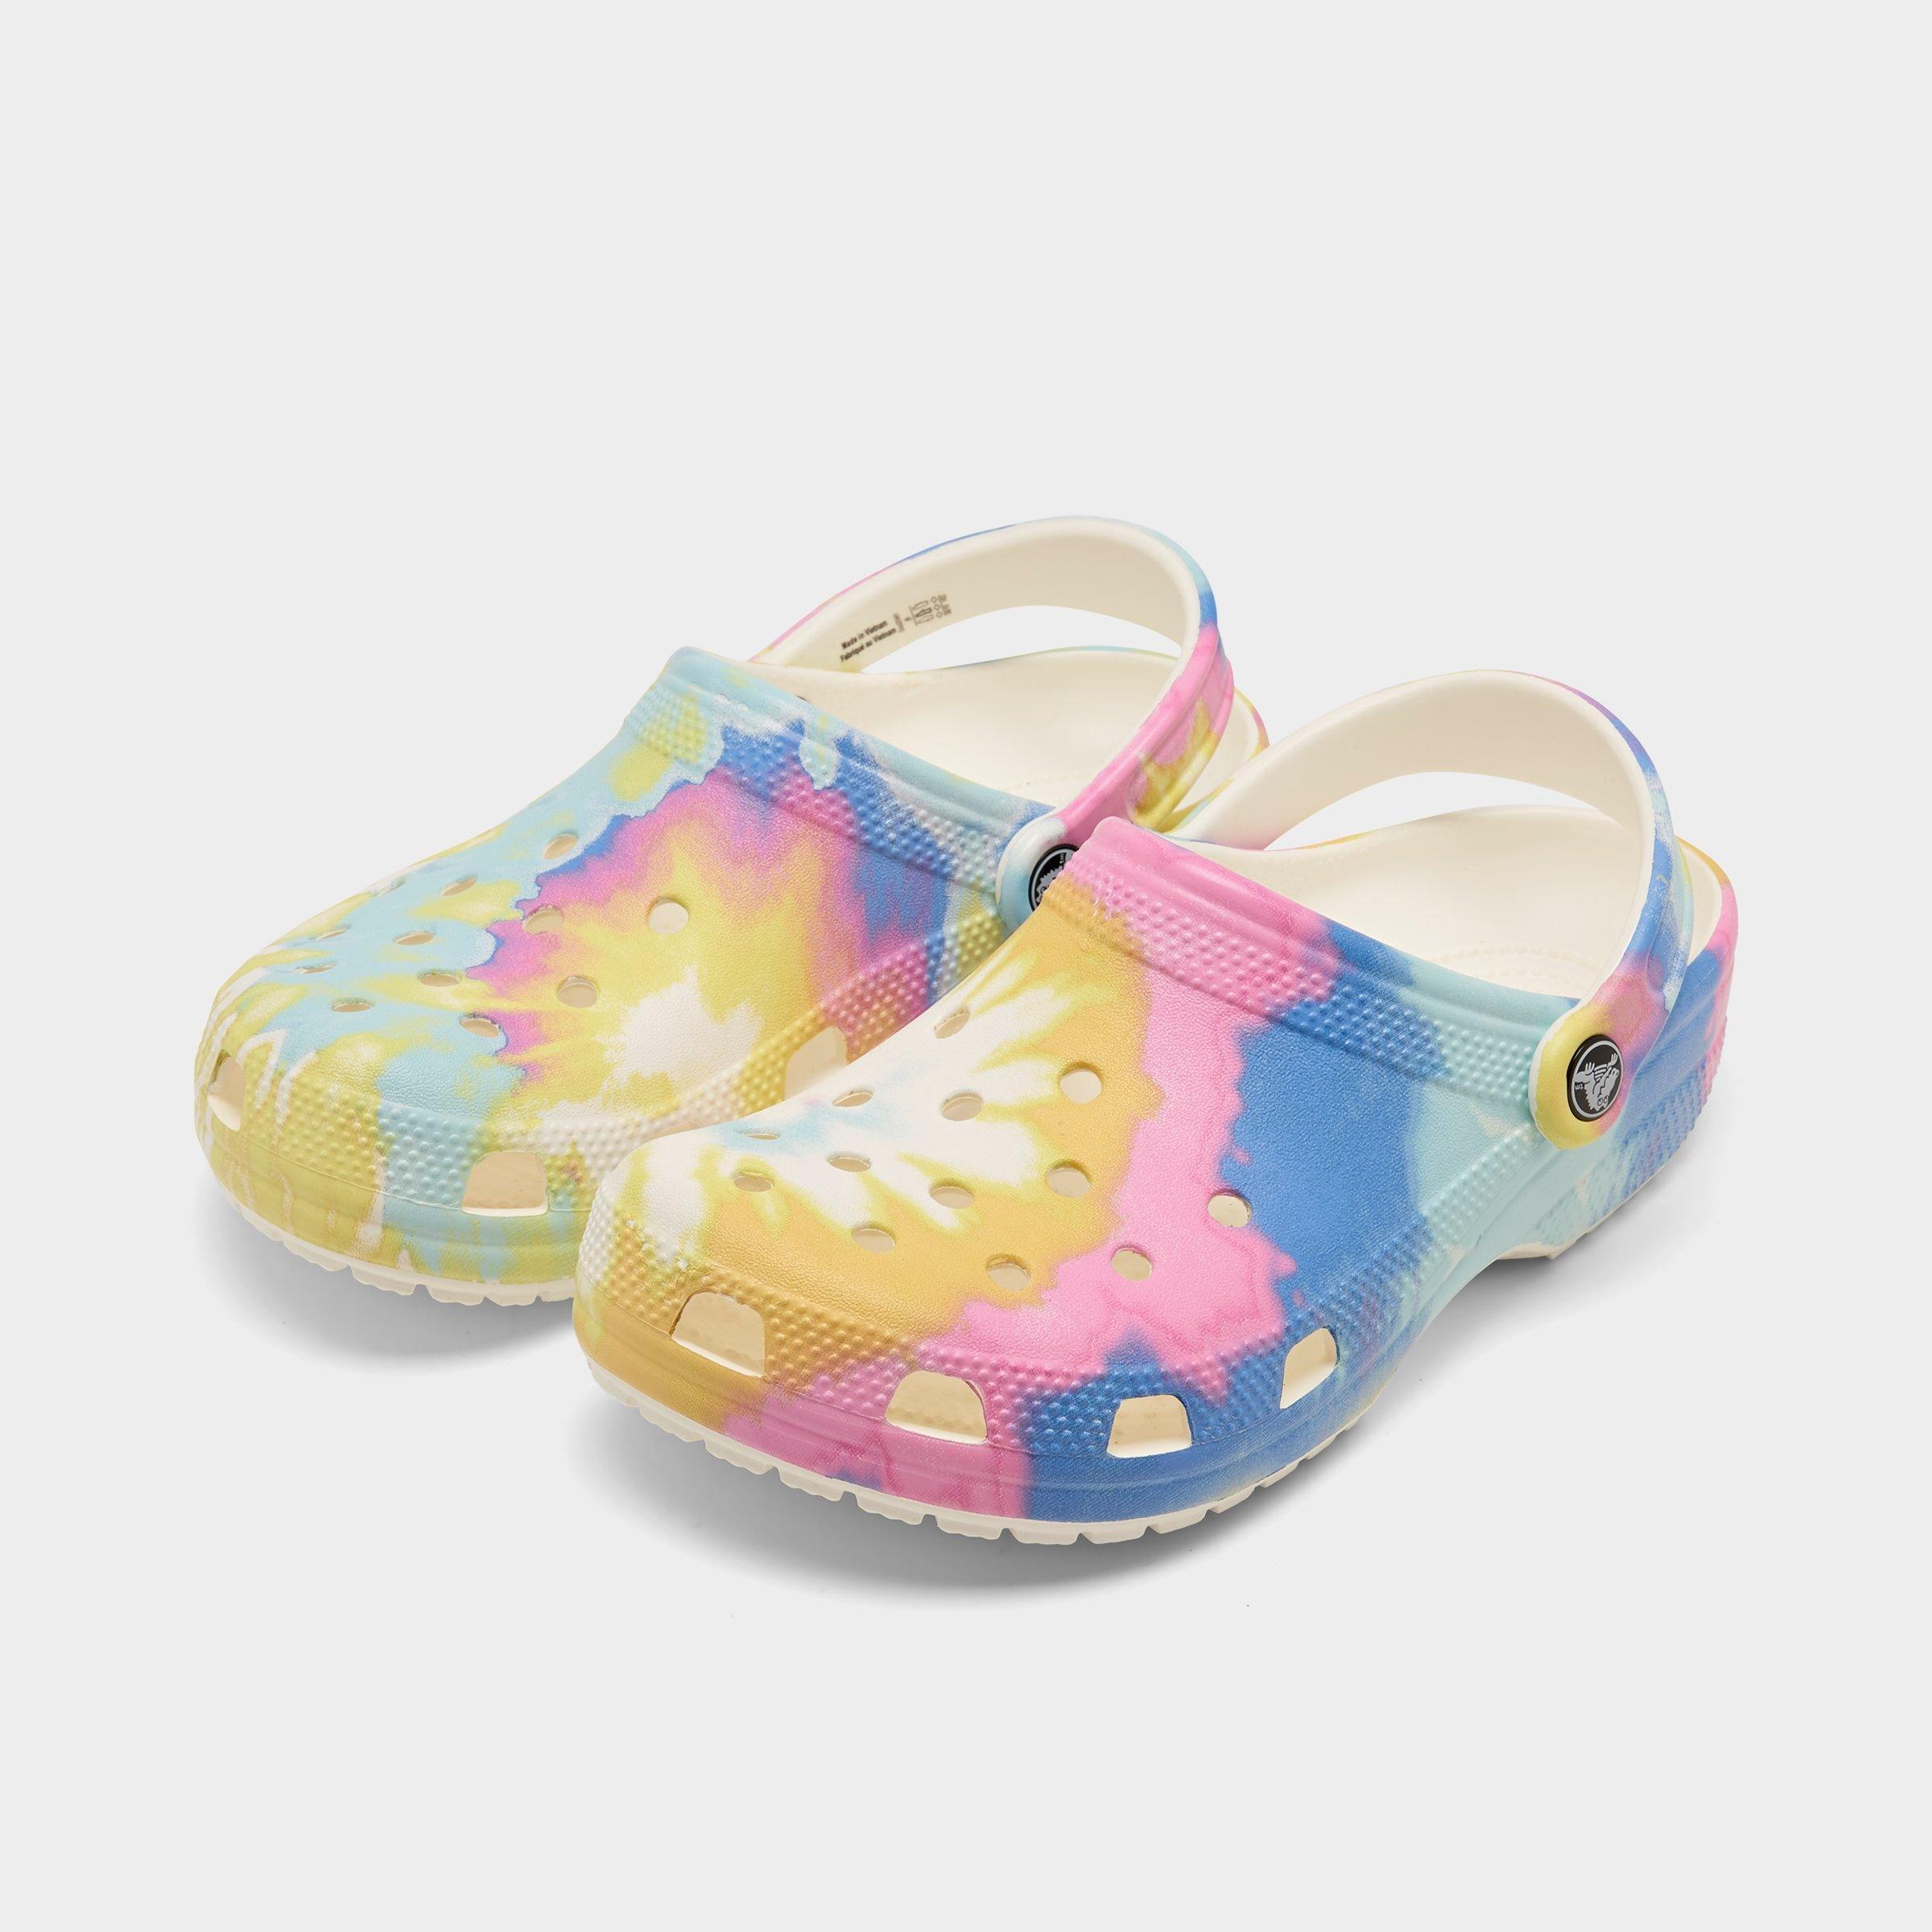 colorful crocs for kids